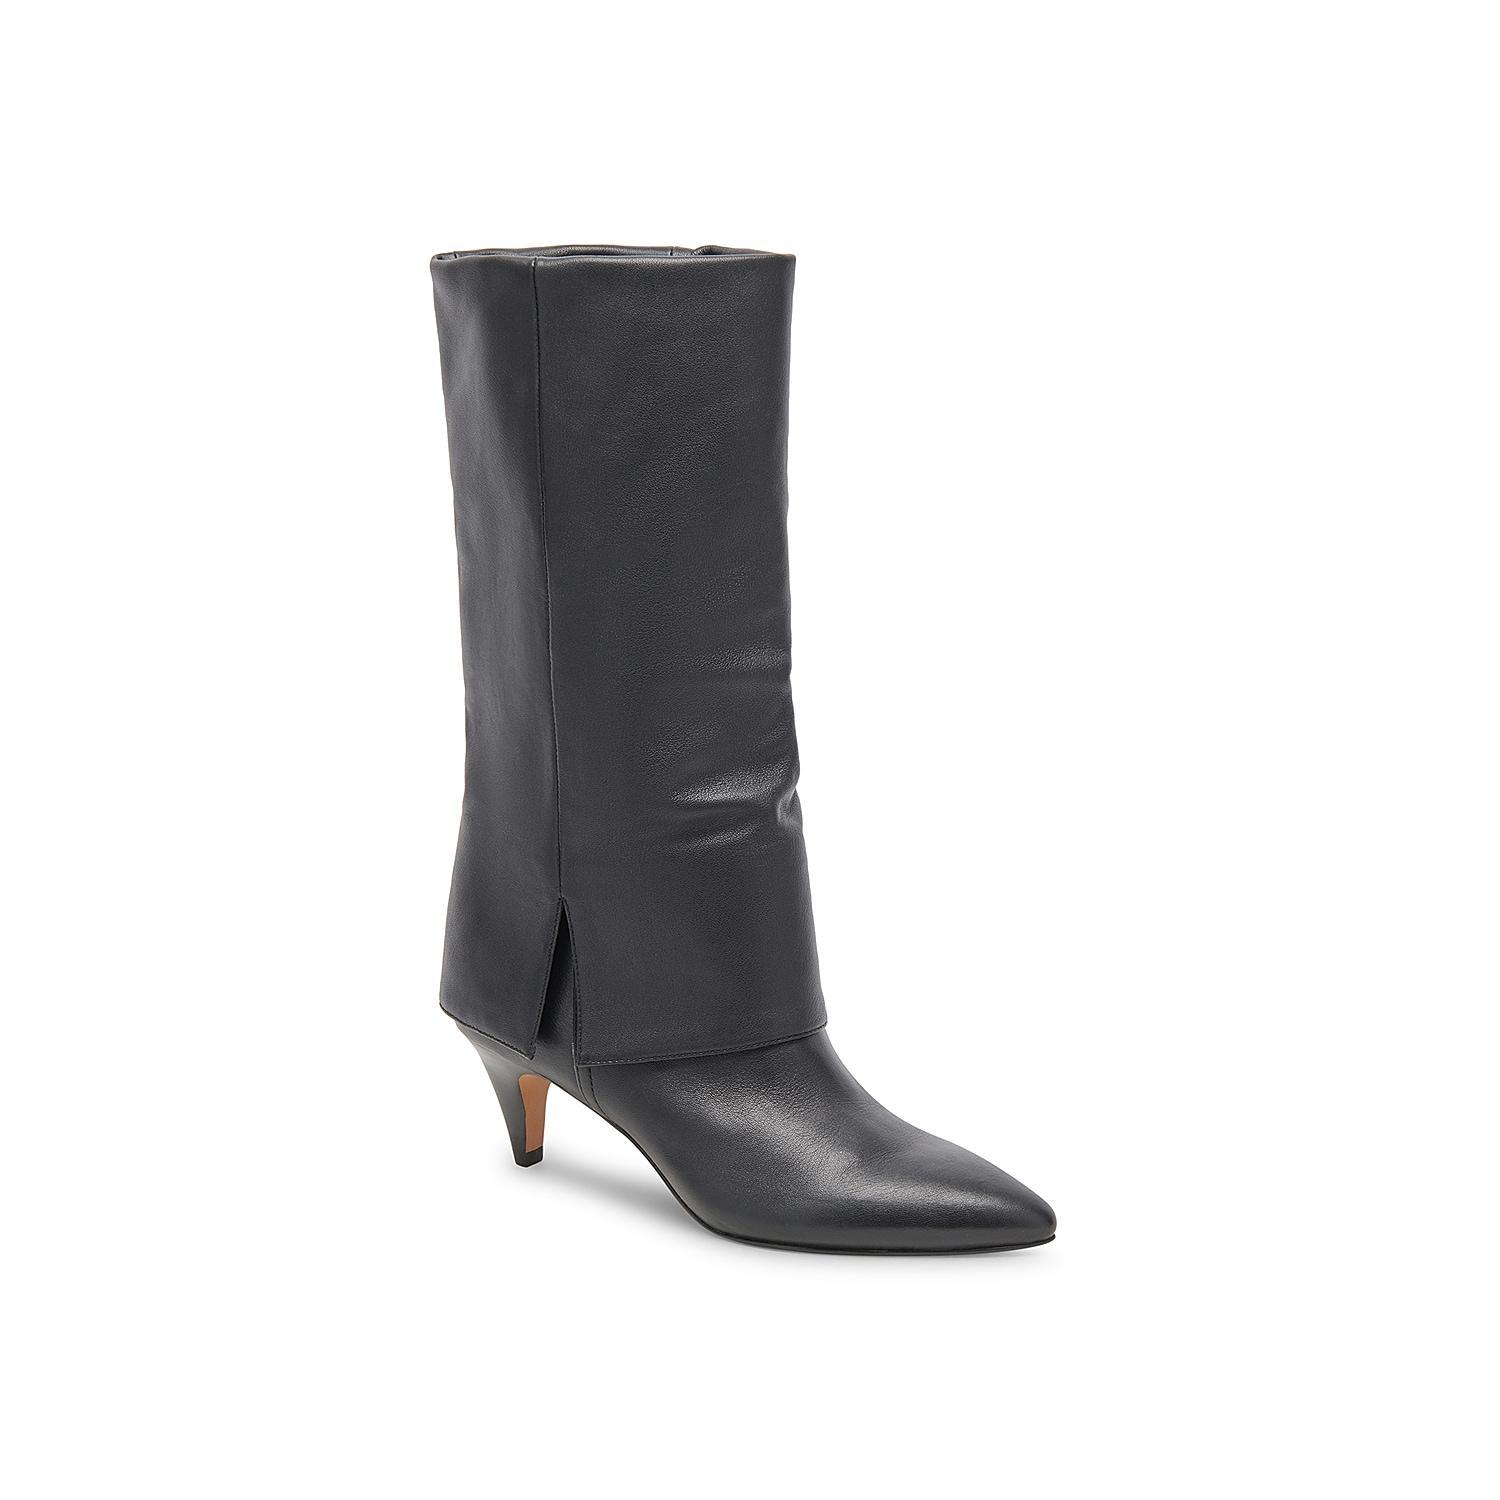 Dolce Vita Dionne Boot Product Image